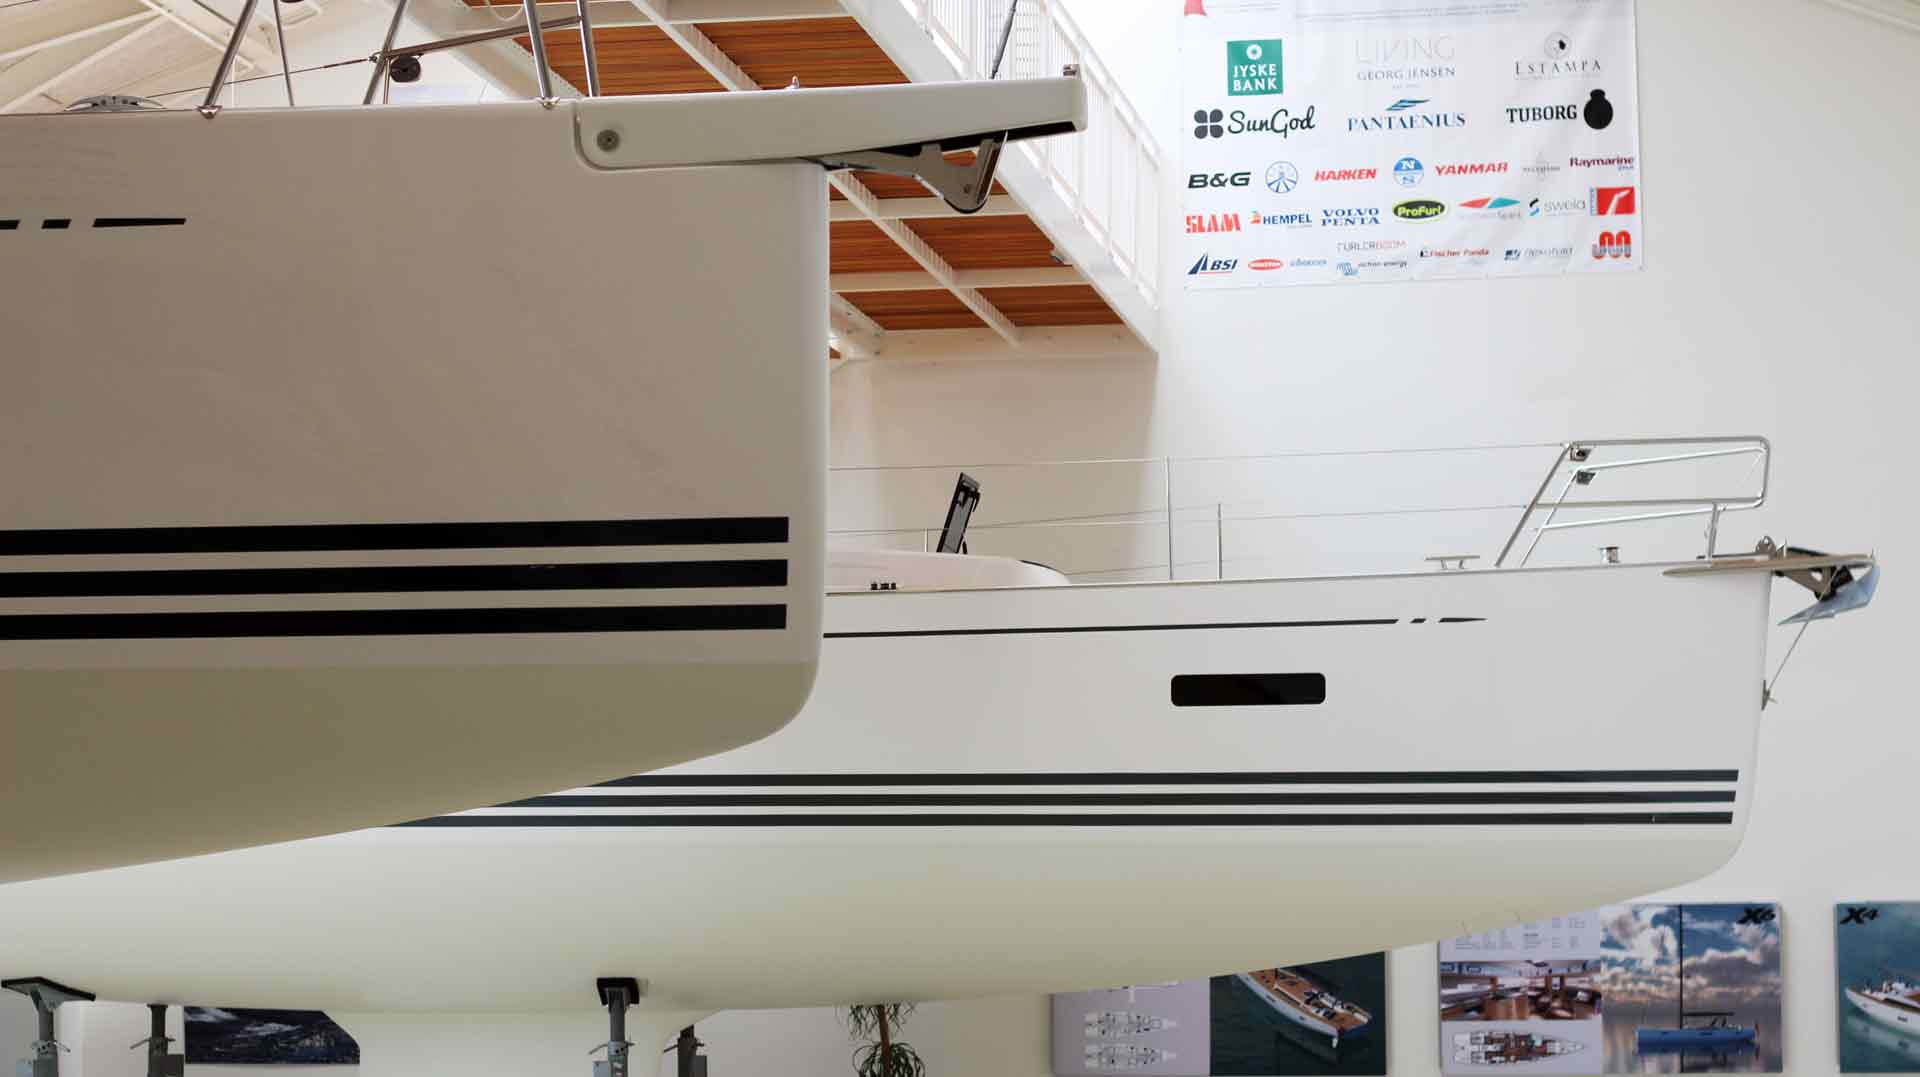 Used Yachts undergo a thorough Refit by X-Yachts